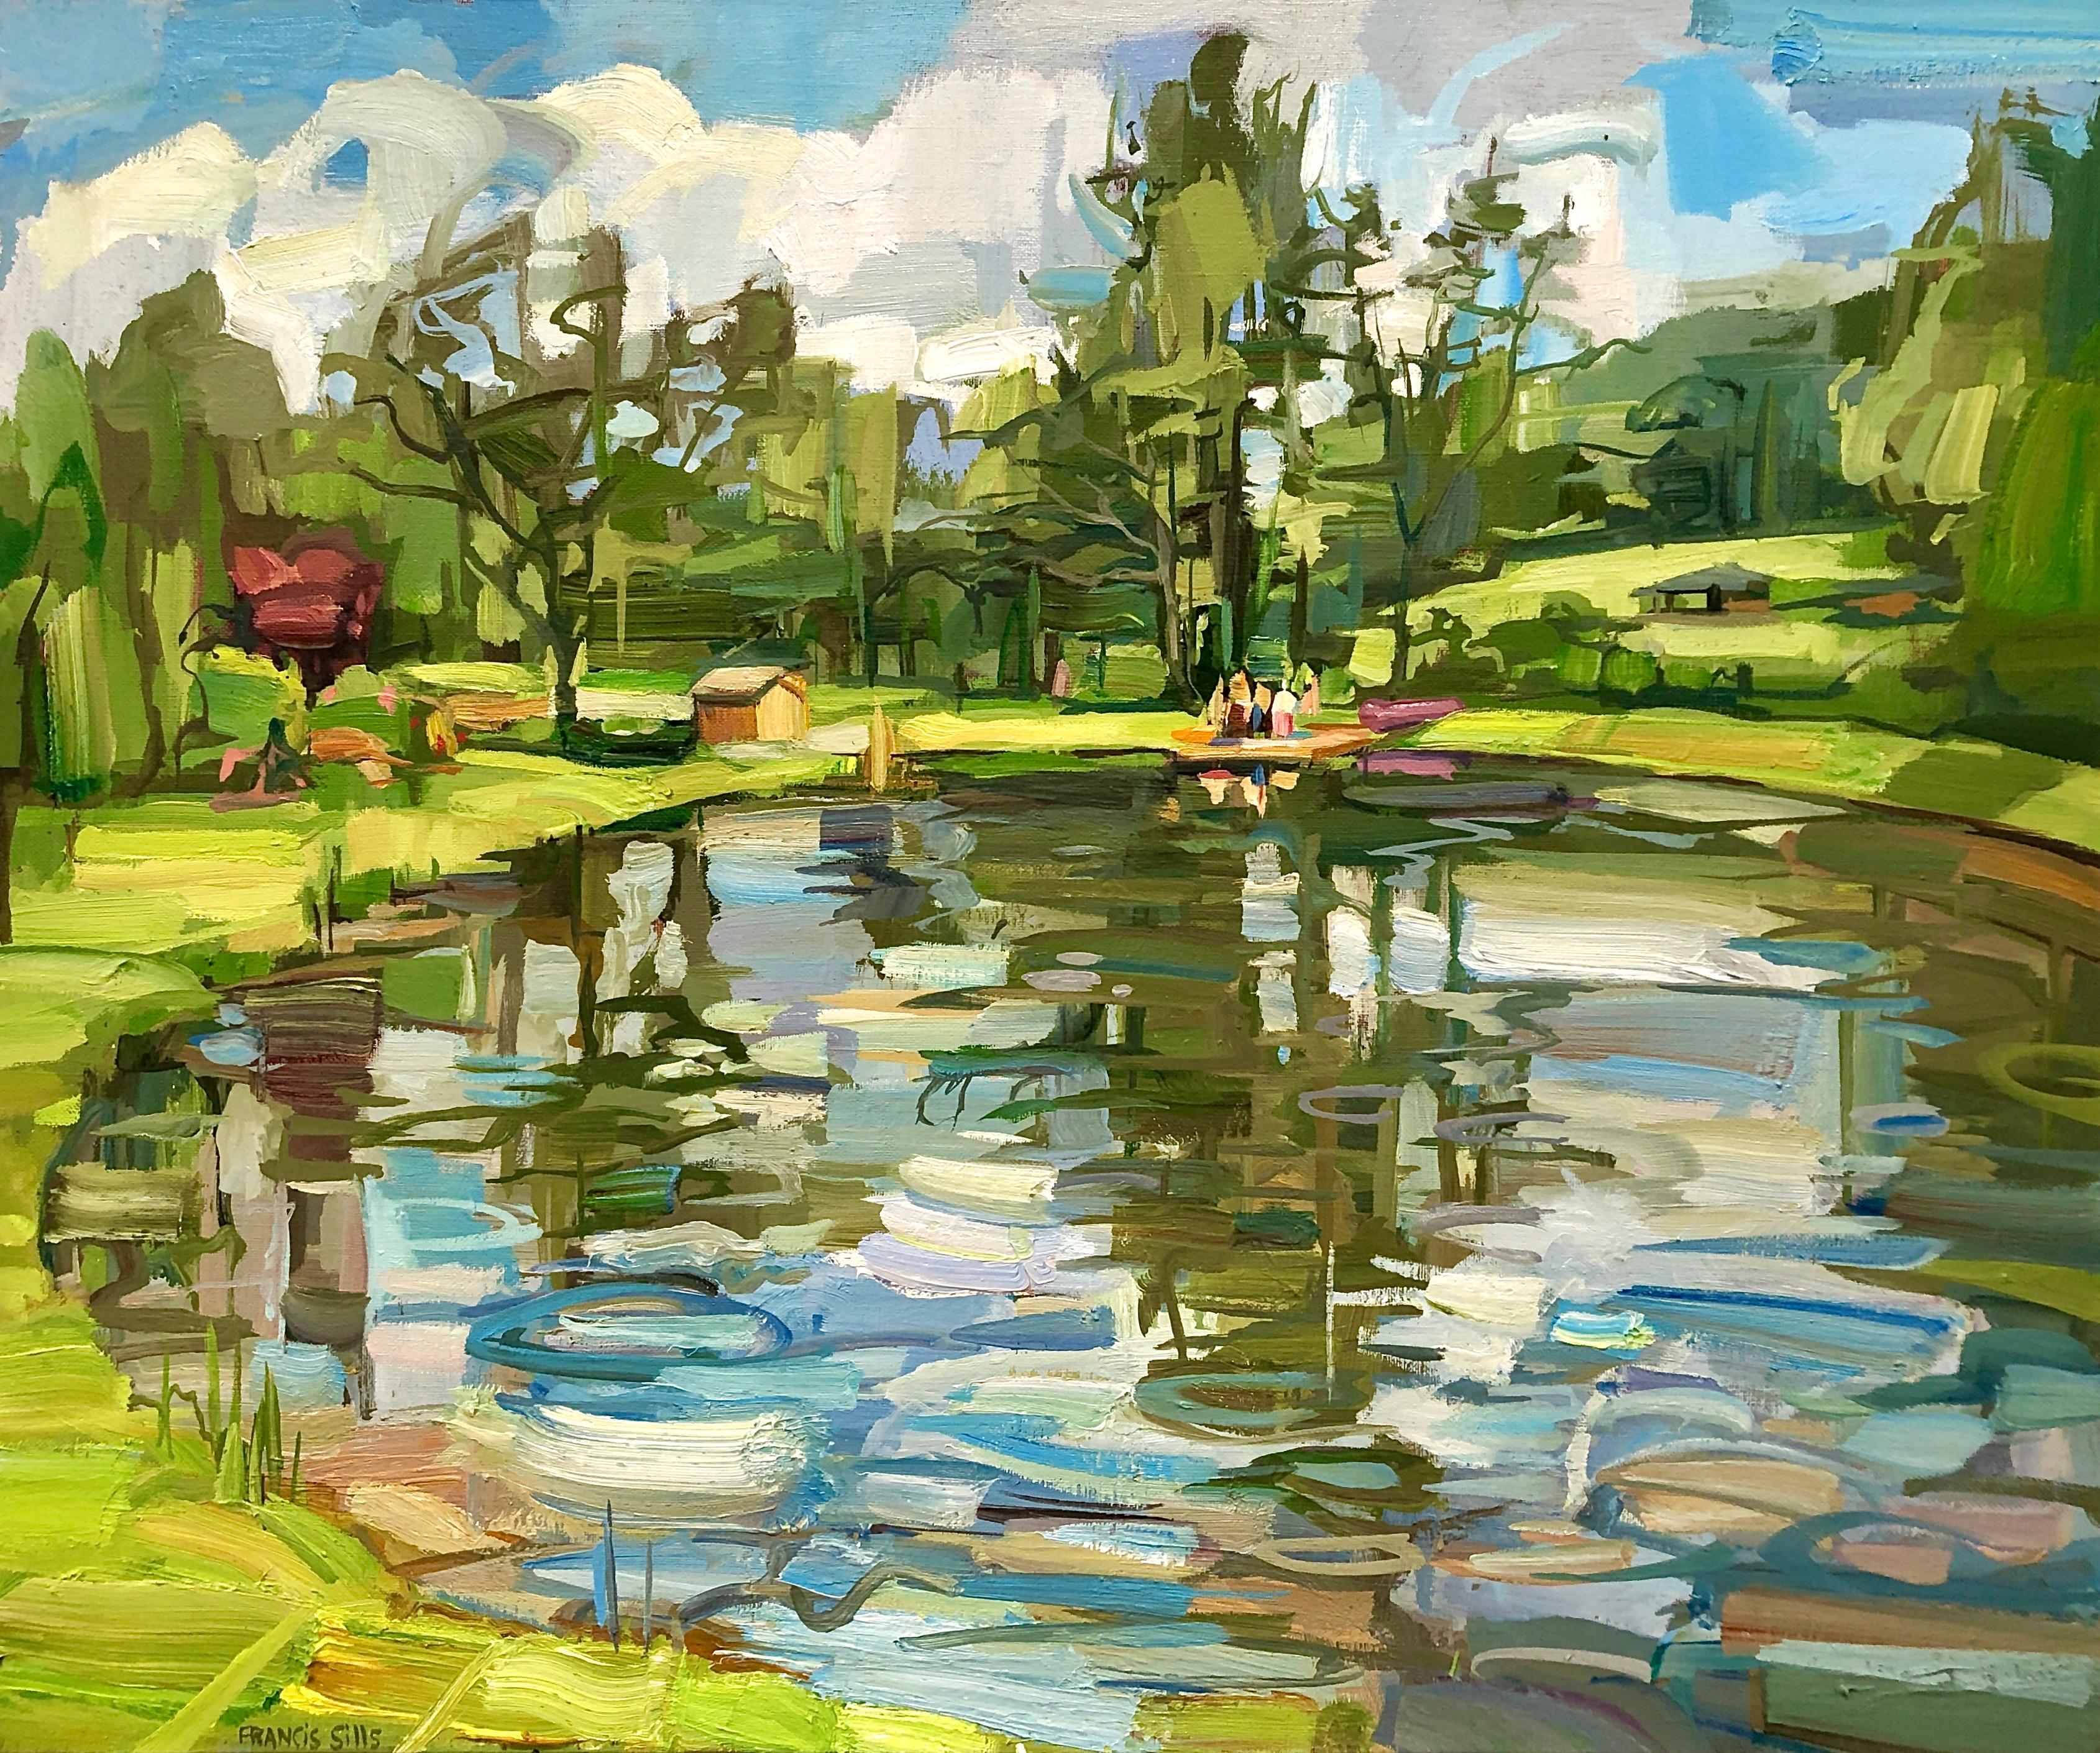 This landscape painting is from Francis Sills' series of Water paintings. A pond reflects the blue sky and clouds overhead in this idyllic outdoor scene. A small pink boat can be seen on the water's edge. Framed in a thin, light natural wood float